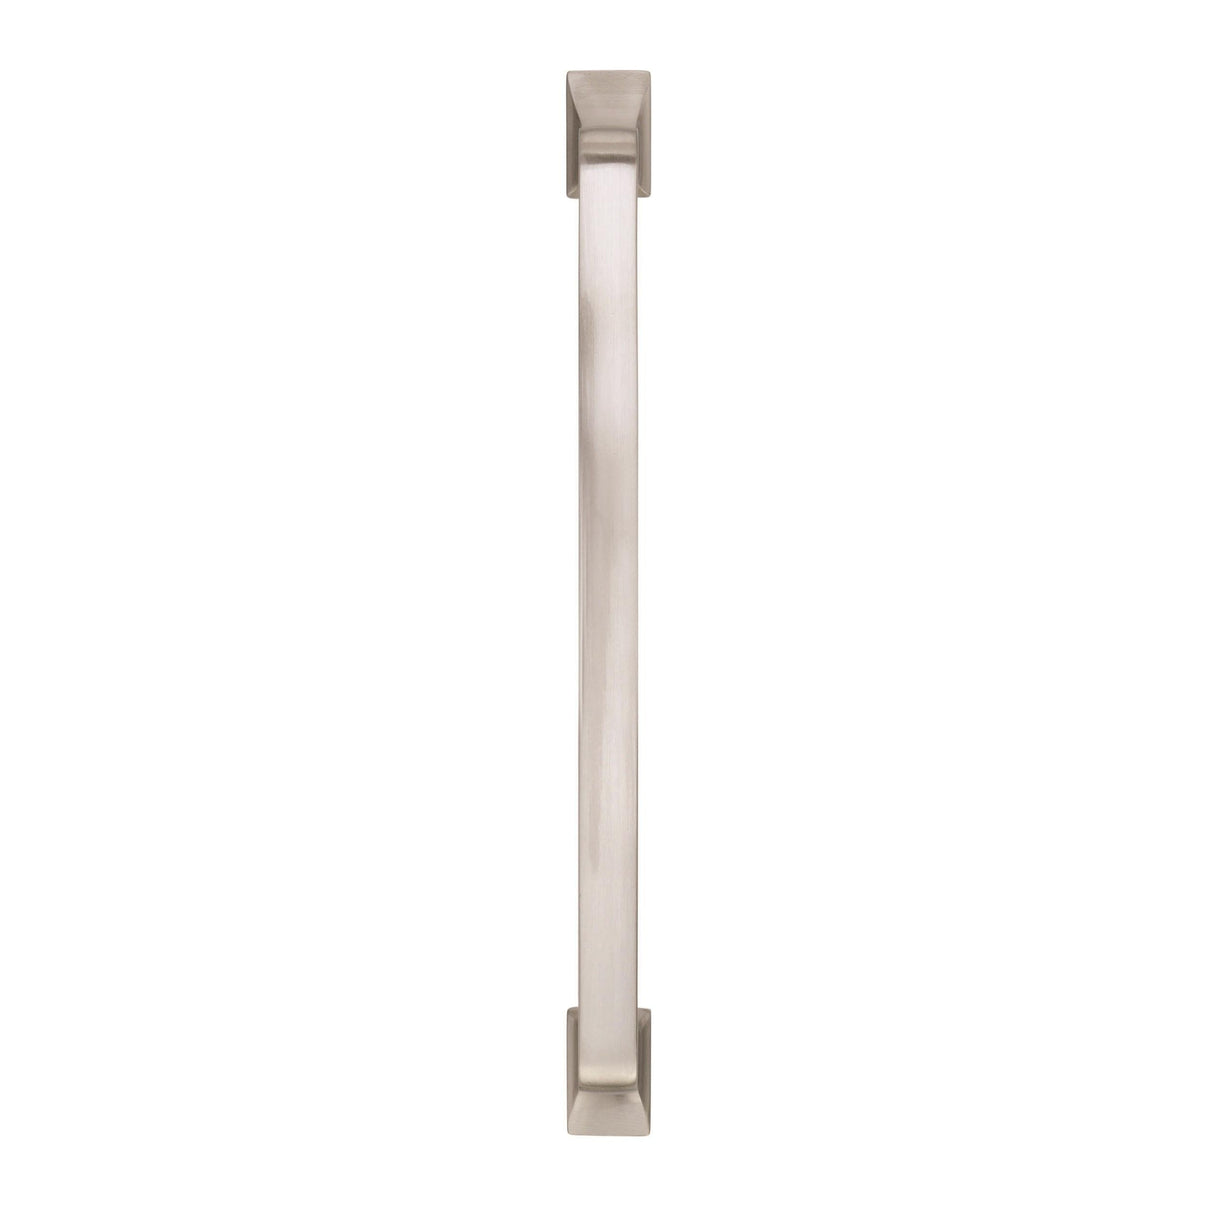 Amerock Westerly 6-5/16 in (160 mm) Center-to-Center Satin Nickel Cabinet Pull